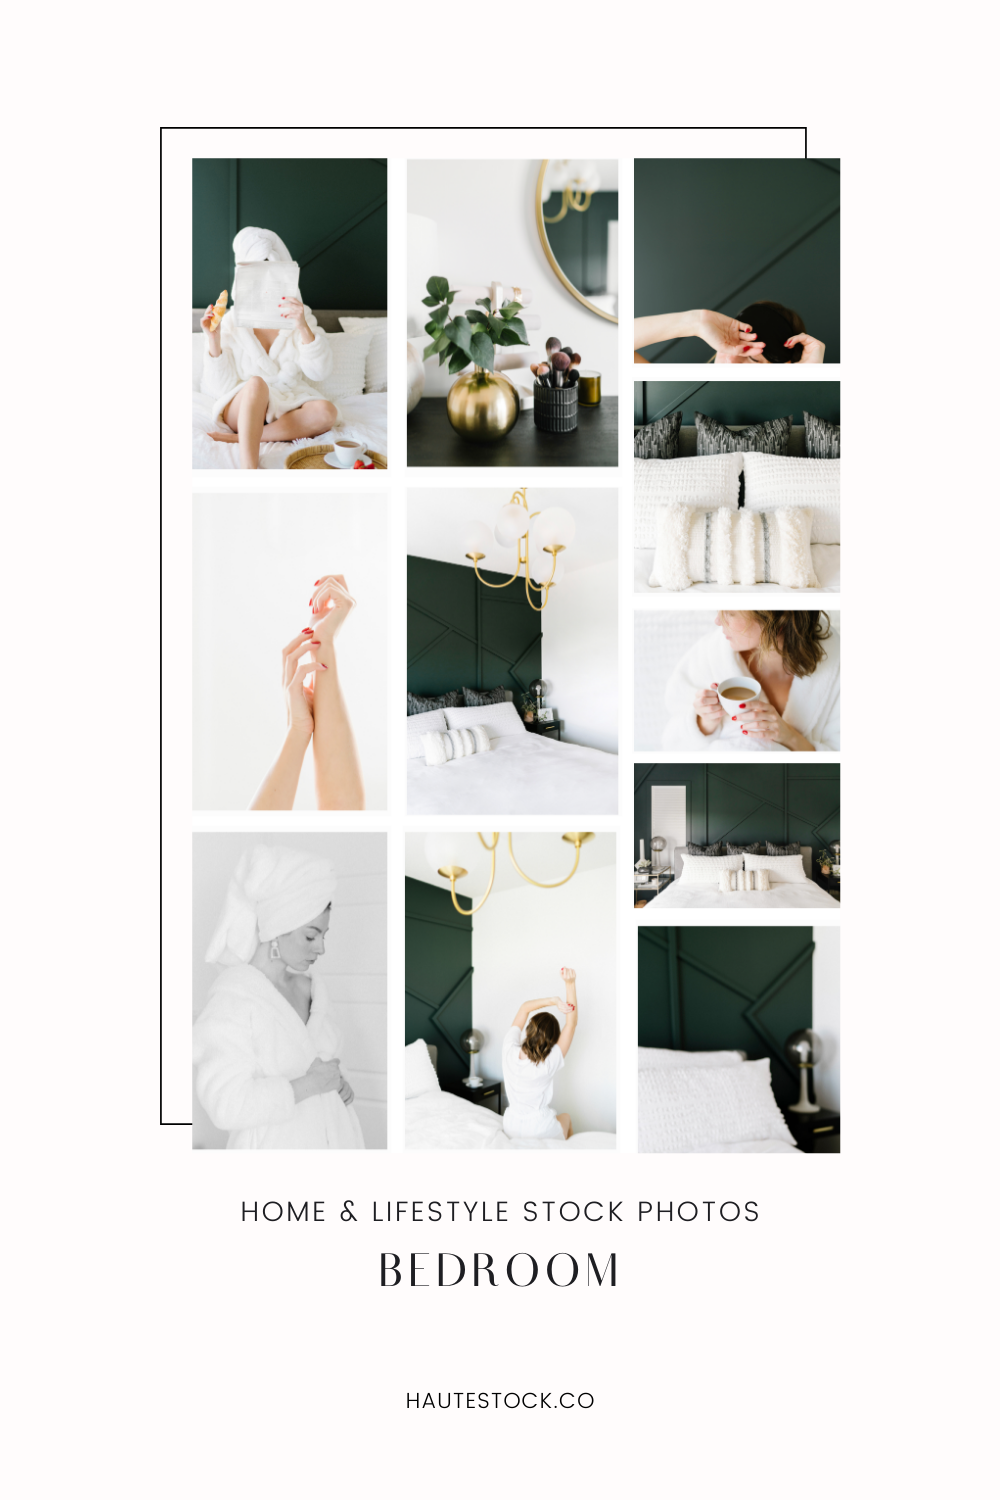 home-interior-stock-photos-work-from-home-stock-images-haute-stock-10.png